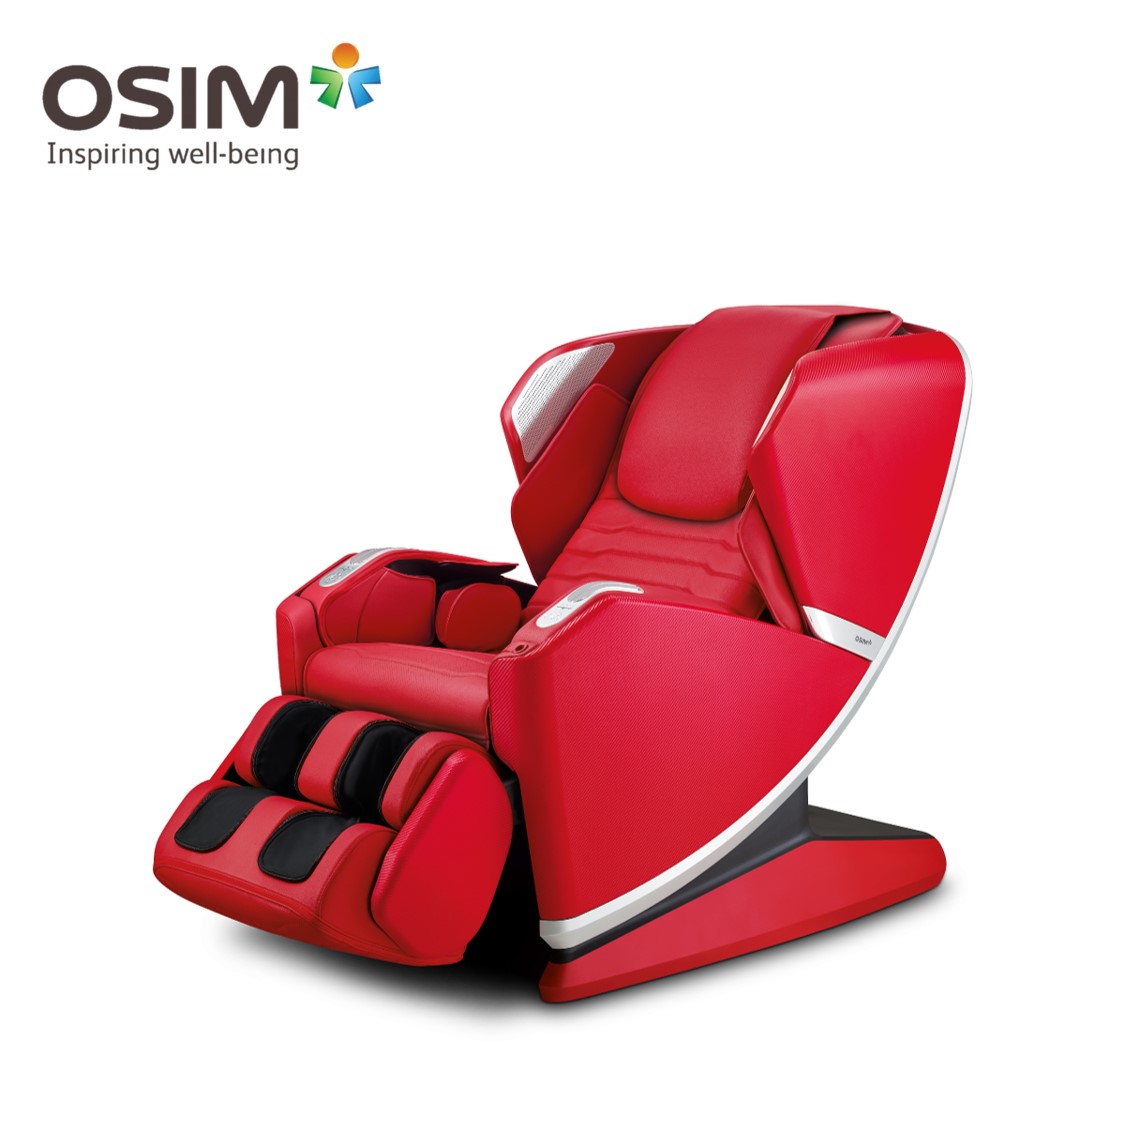 OSIM uLove 3 (Red) Well-Being Chair